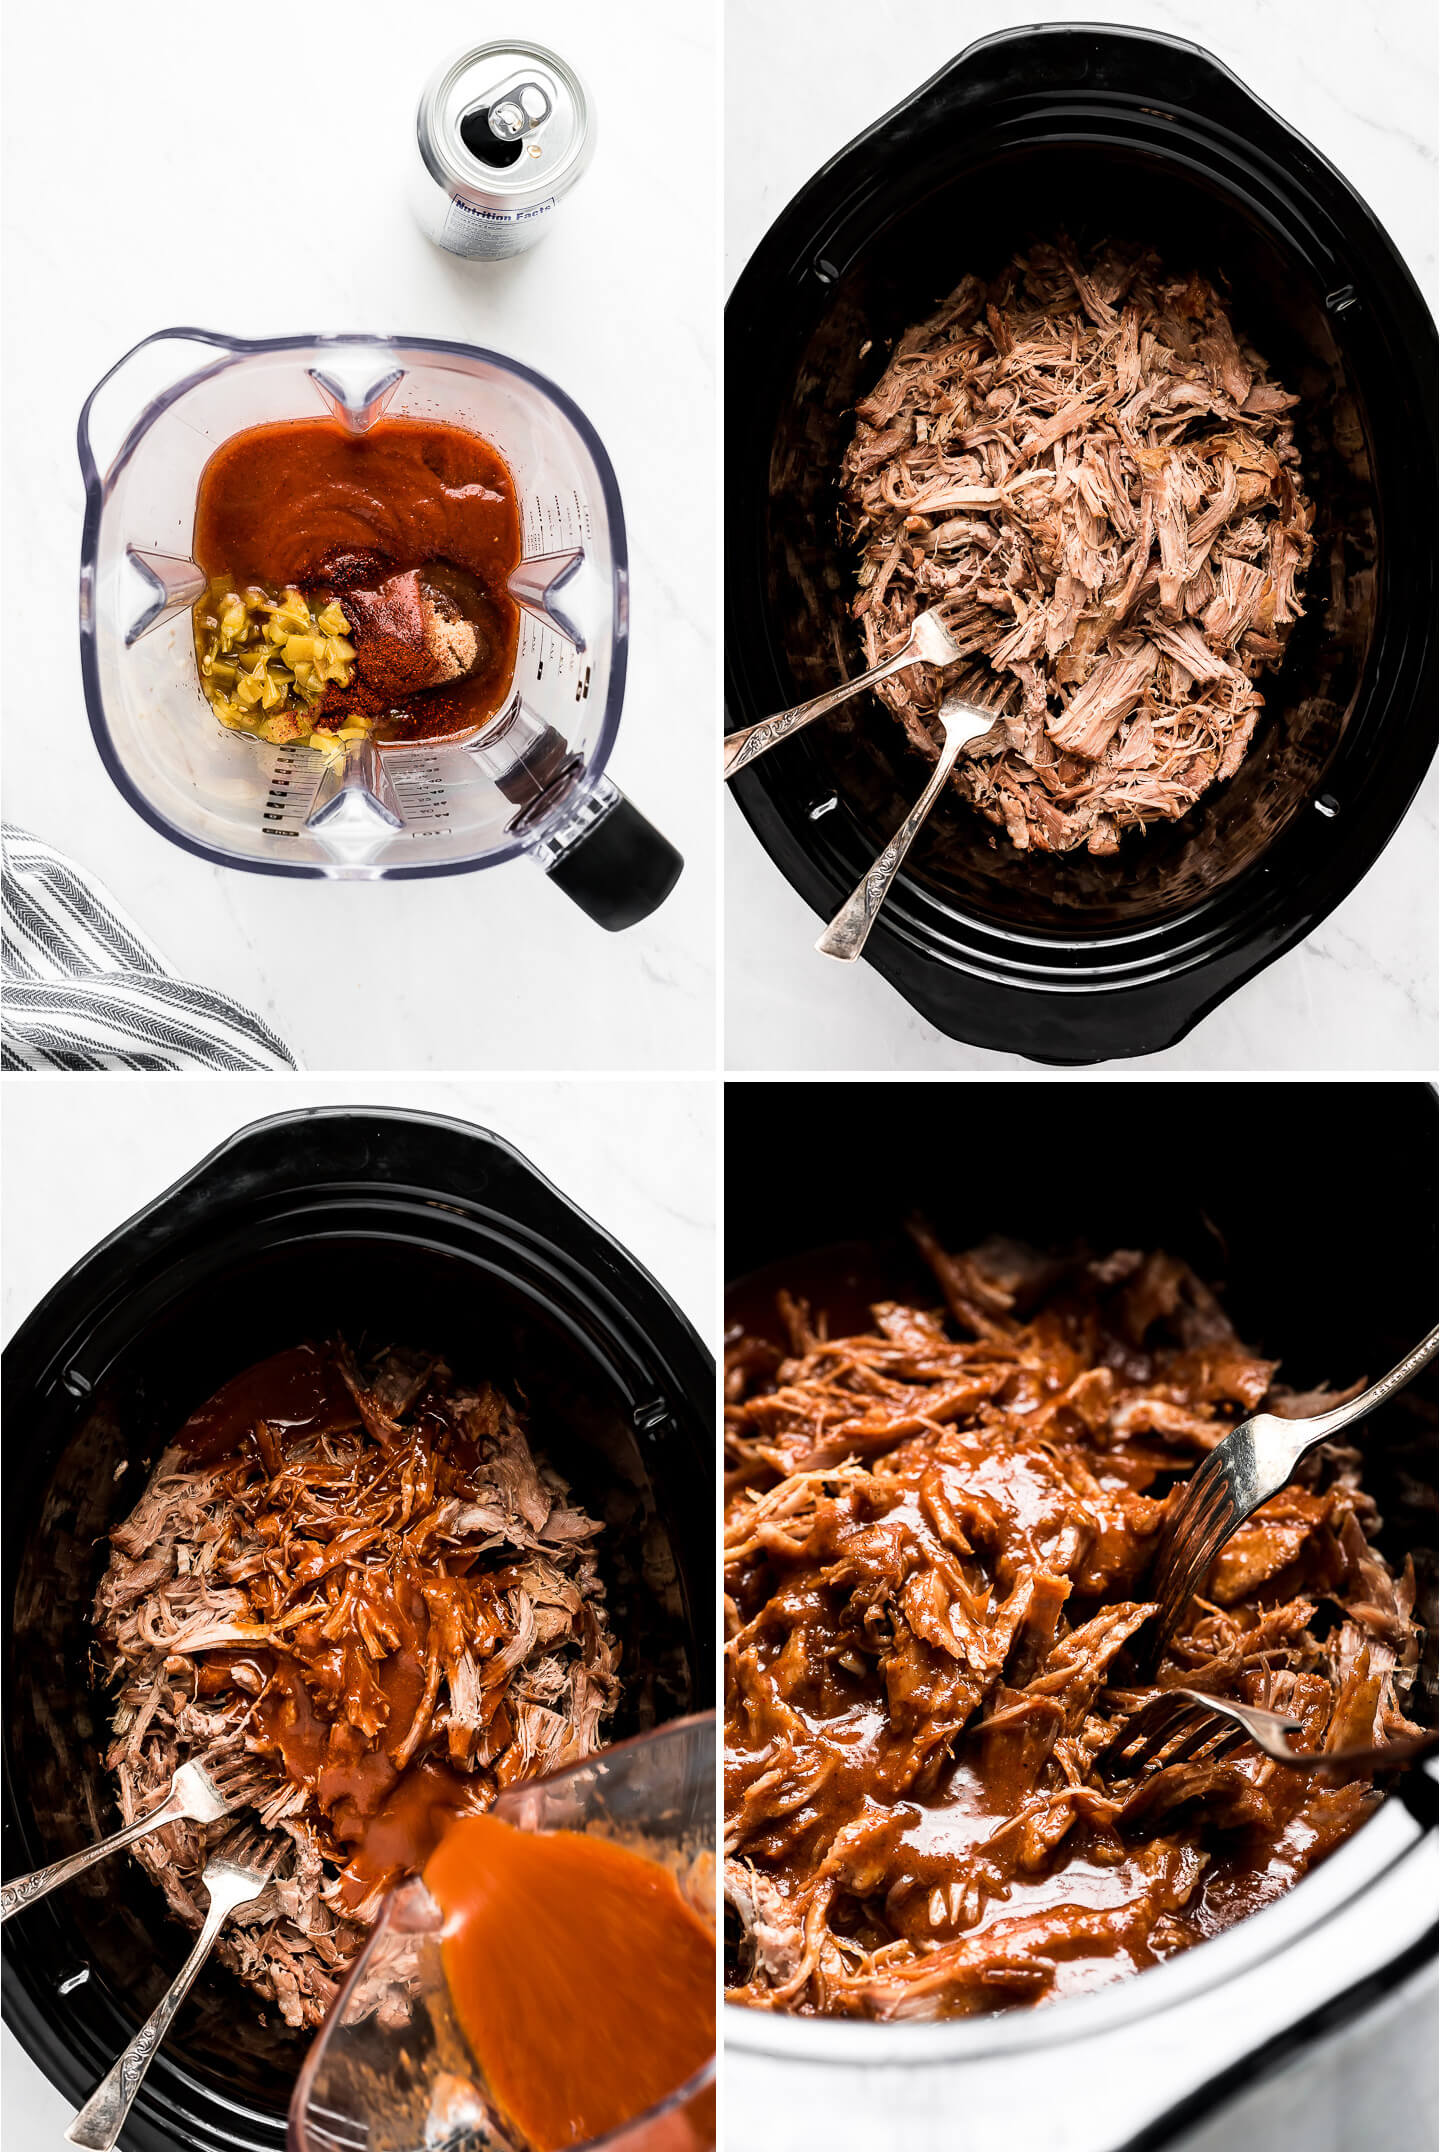 Four photos- ingredients for sauce in a blender; a slow cooker with shredded pork; shredded pork with a red sauce being poured over the top; a close up of the pork covered in sauce.